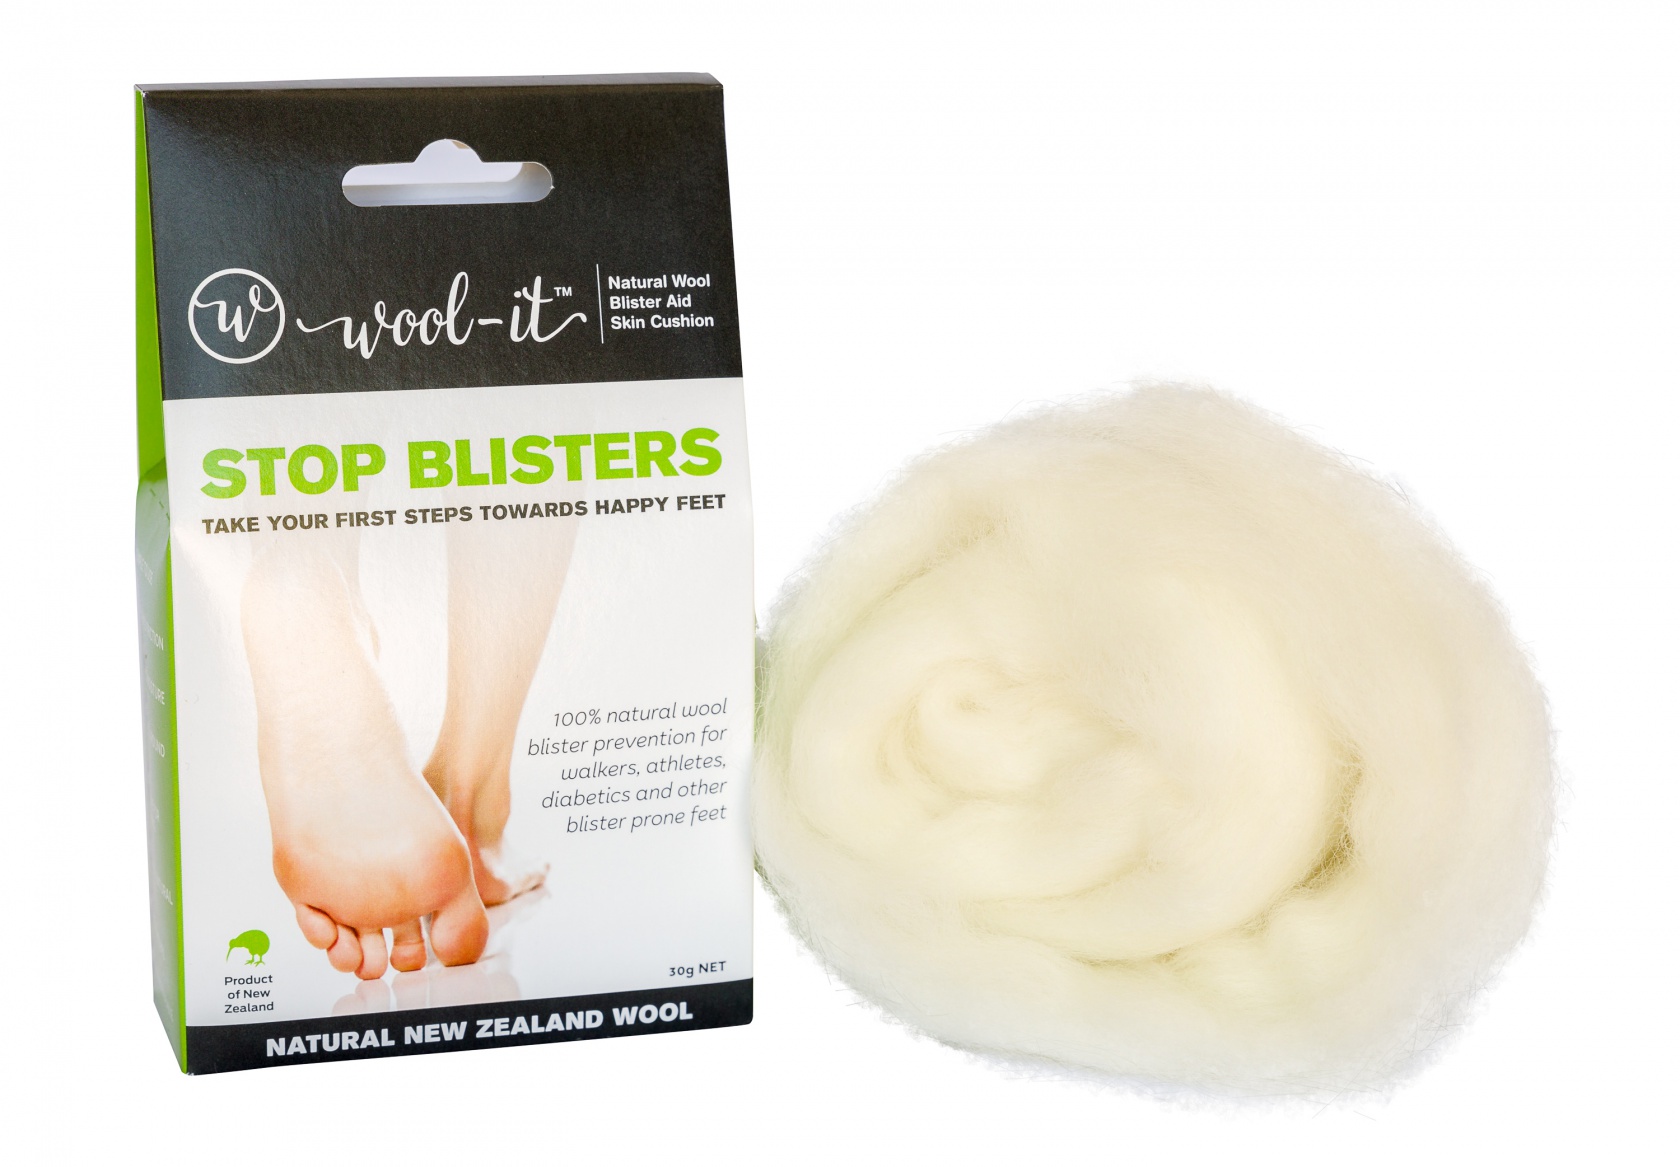 Wool-it Blister Prevention 30g Box image 1